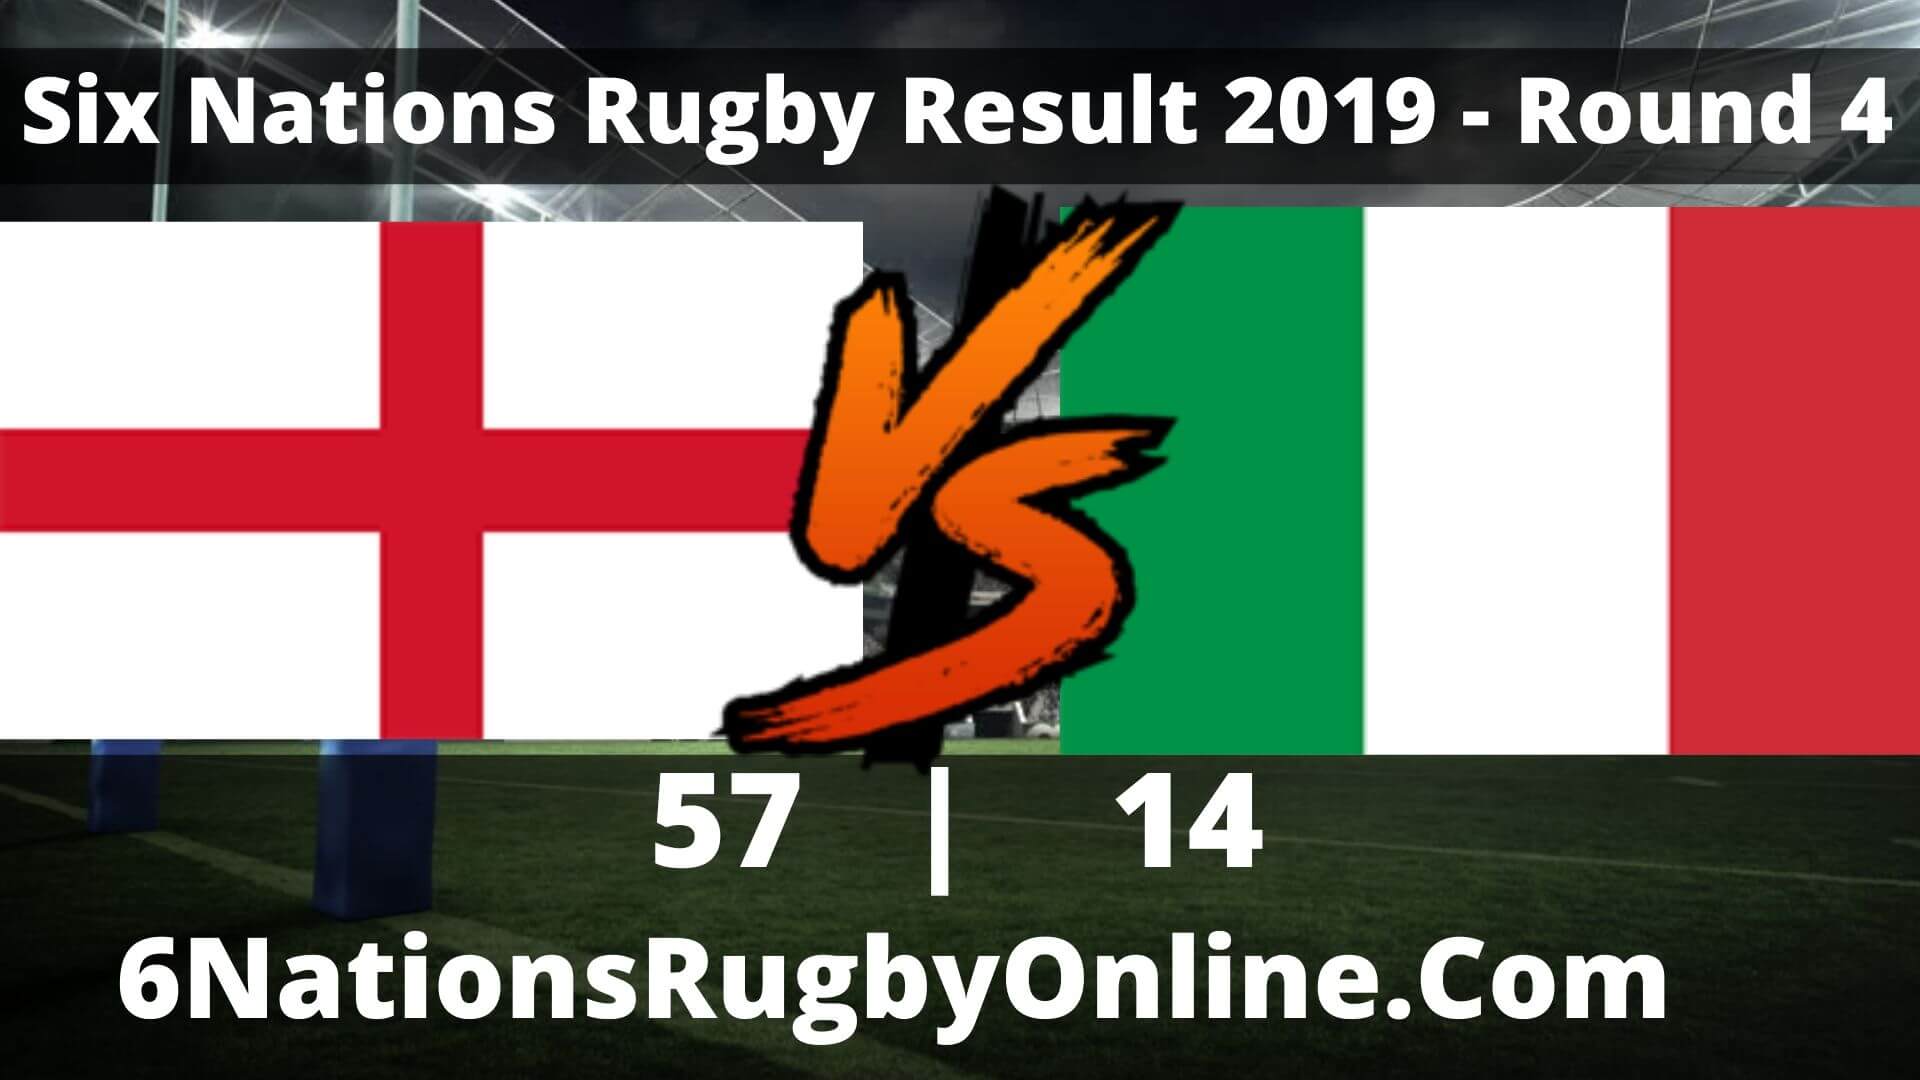 ENGLAND VS ITALY Results 2019 | SIX NATIONS RUGBY ROUND 4